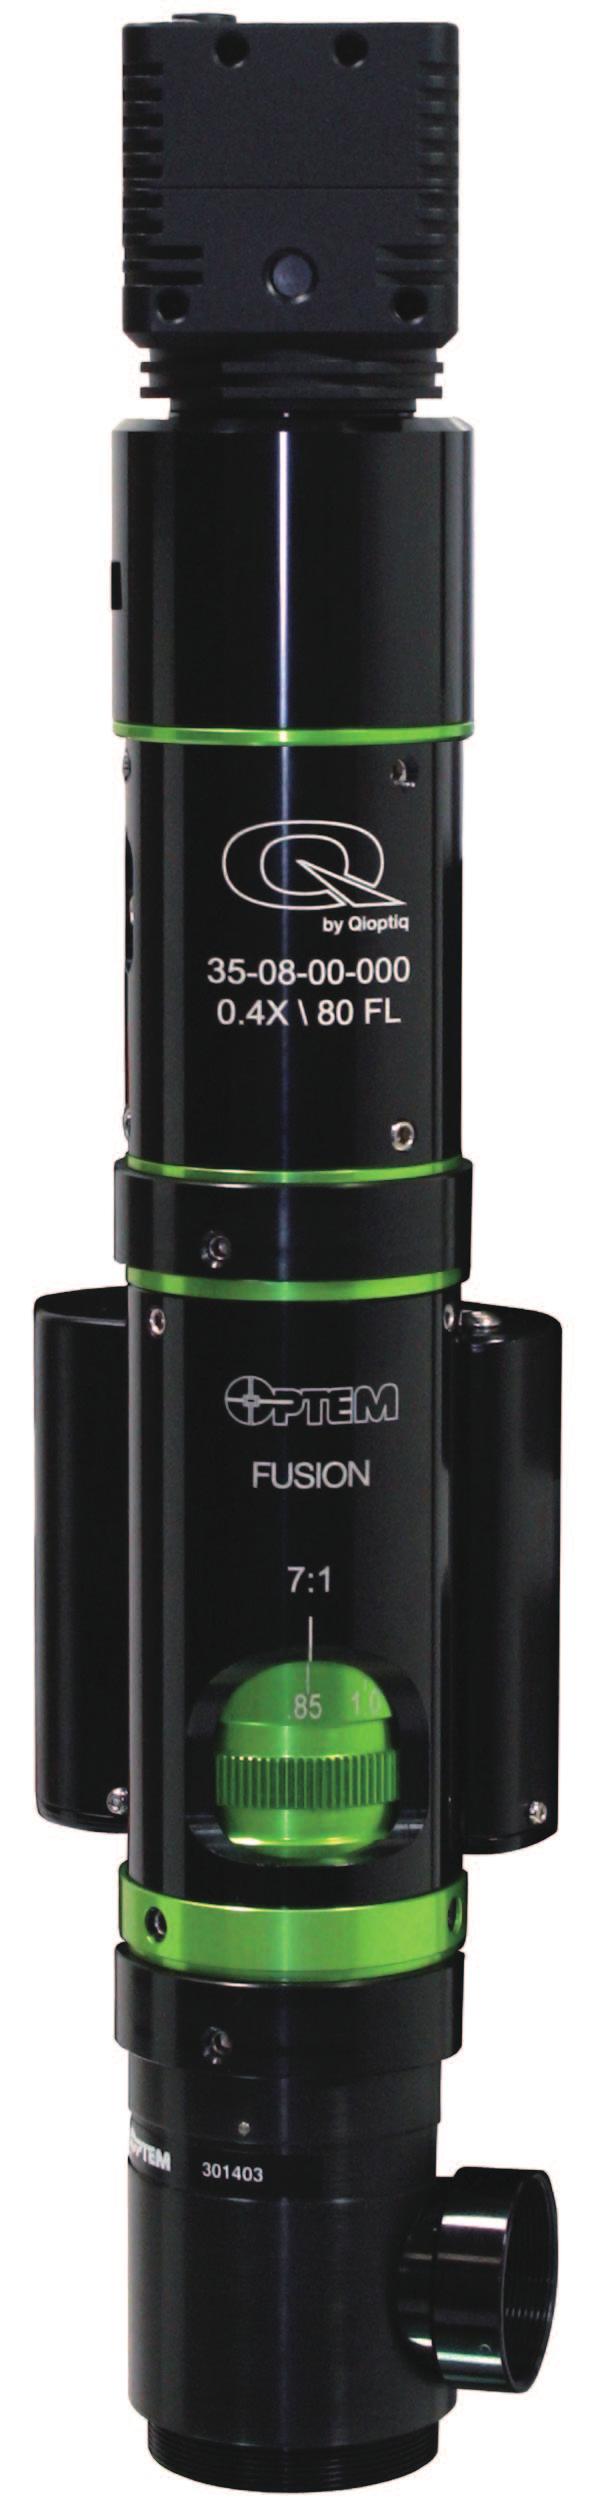 Illuminators Video Tunable FUSION- Modular Interchangeable Lens System High-Magnification Imaging Wafer Processing MEMS Development Non-Contact Metrology Fiber Alignment Analytical Probing Solder